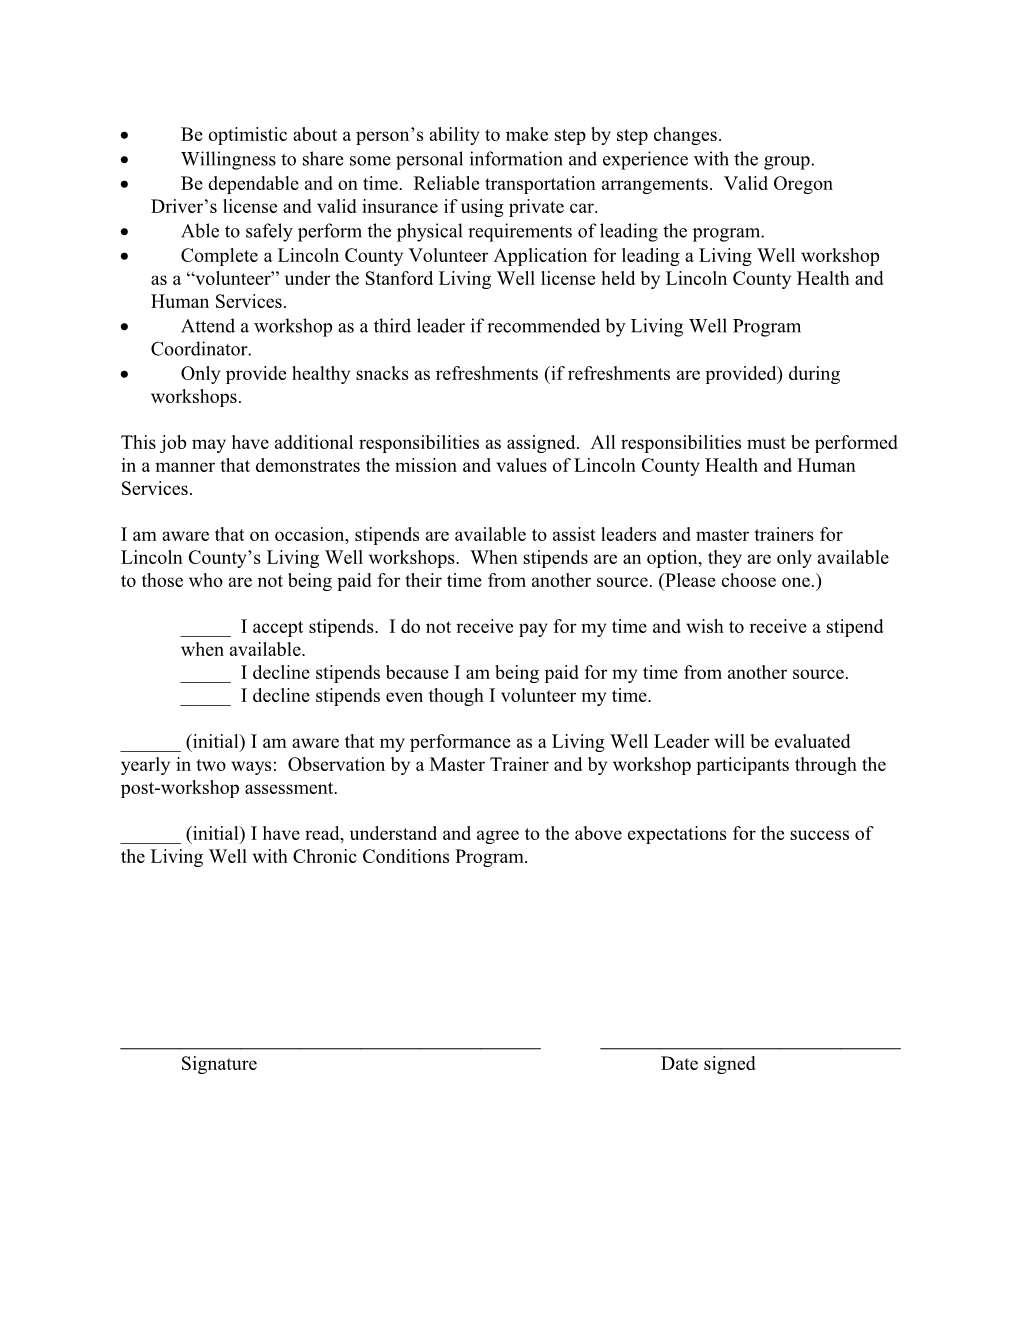 Living Well Leader Agreement - Lincoln County